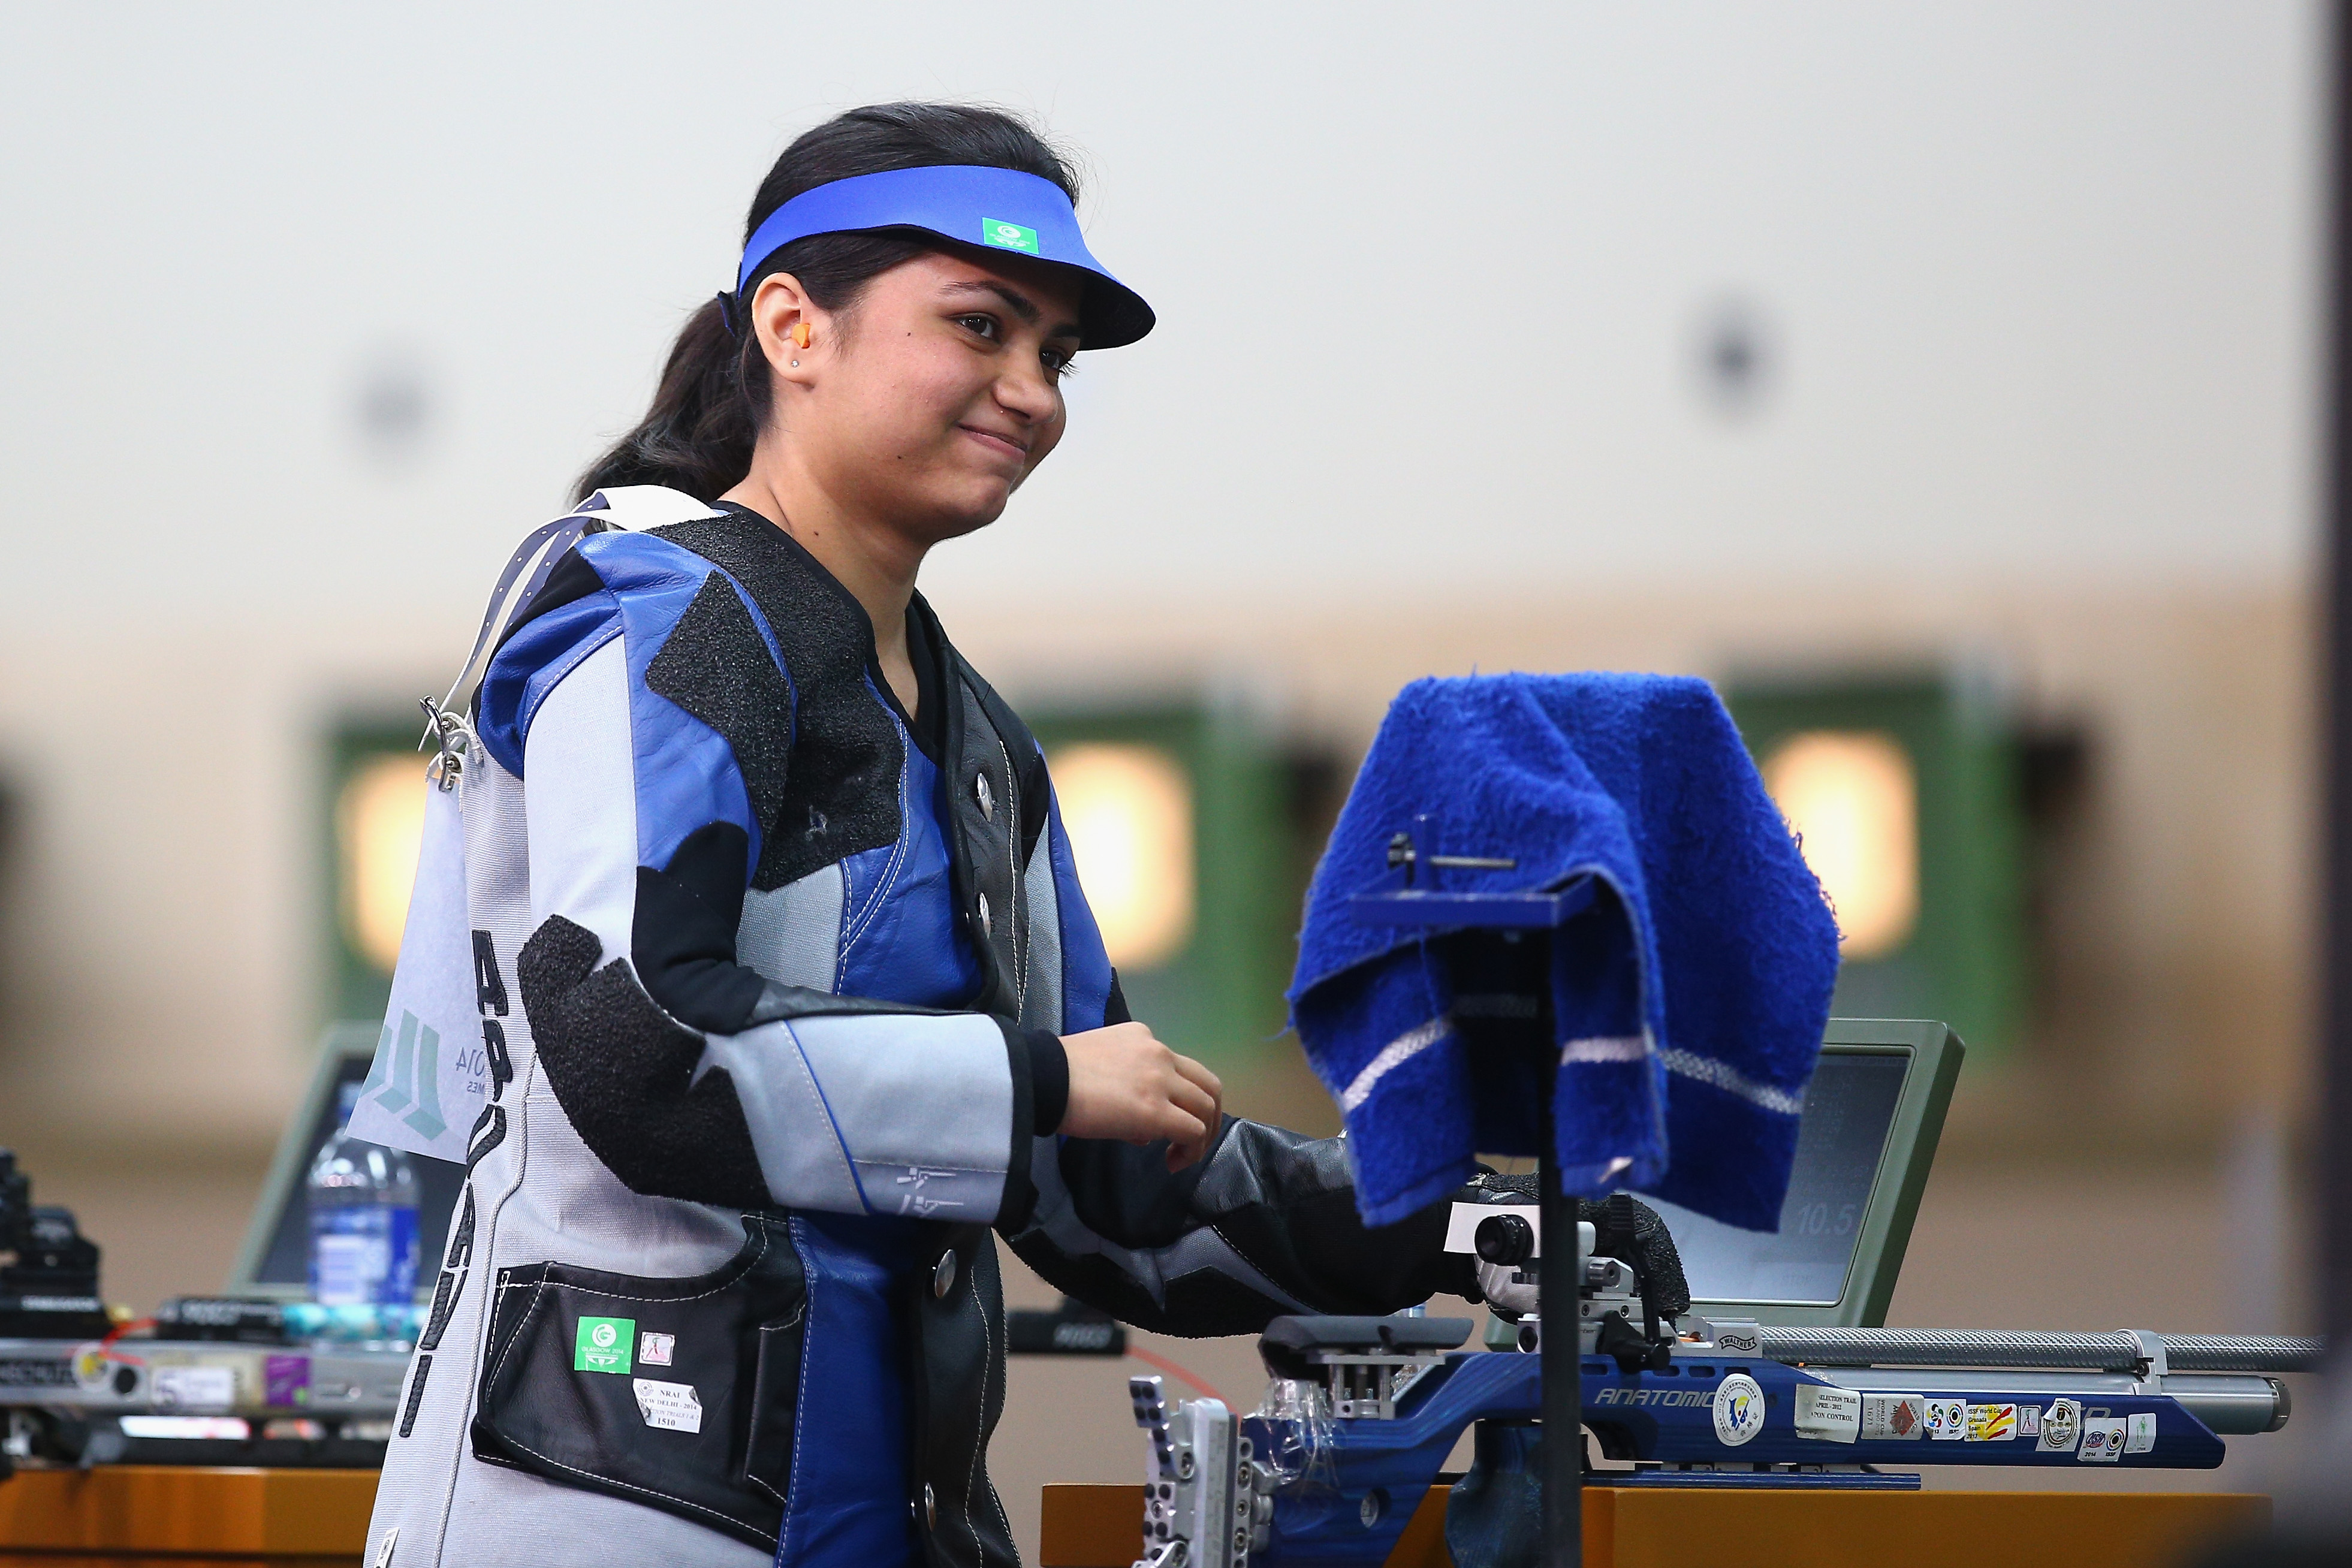 Focused on following technique and keeping nerves, says Apurvi Chandela